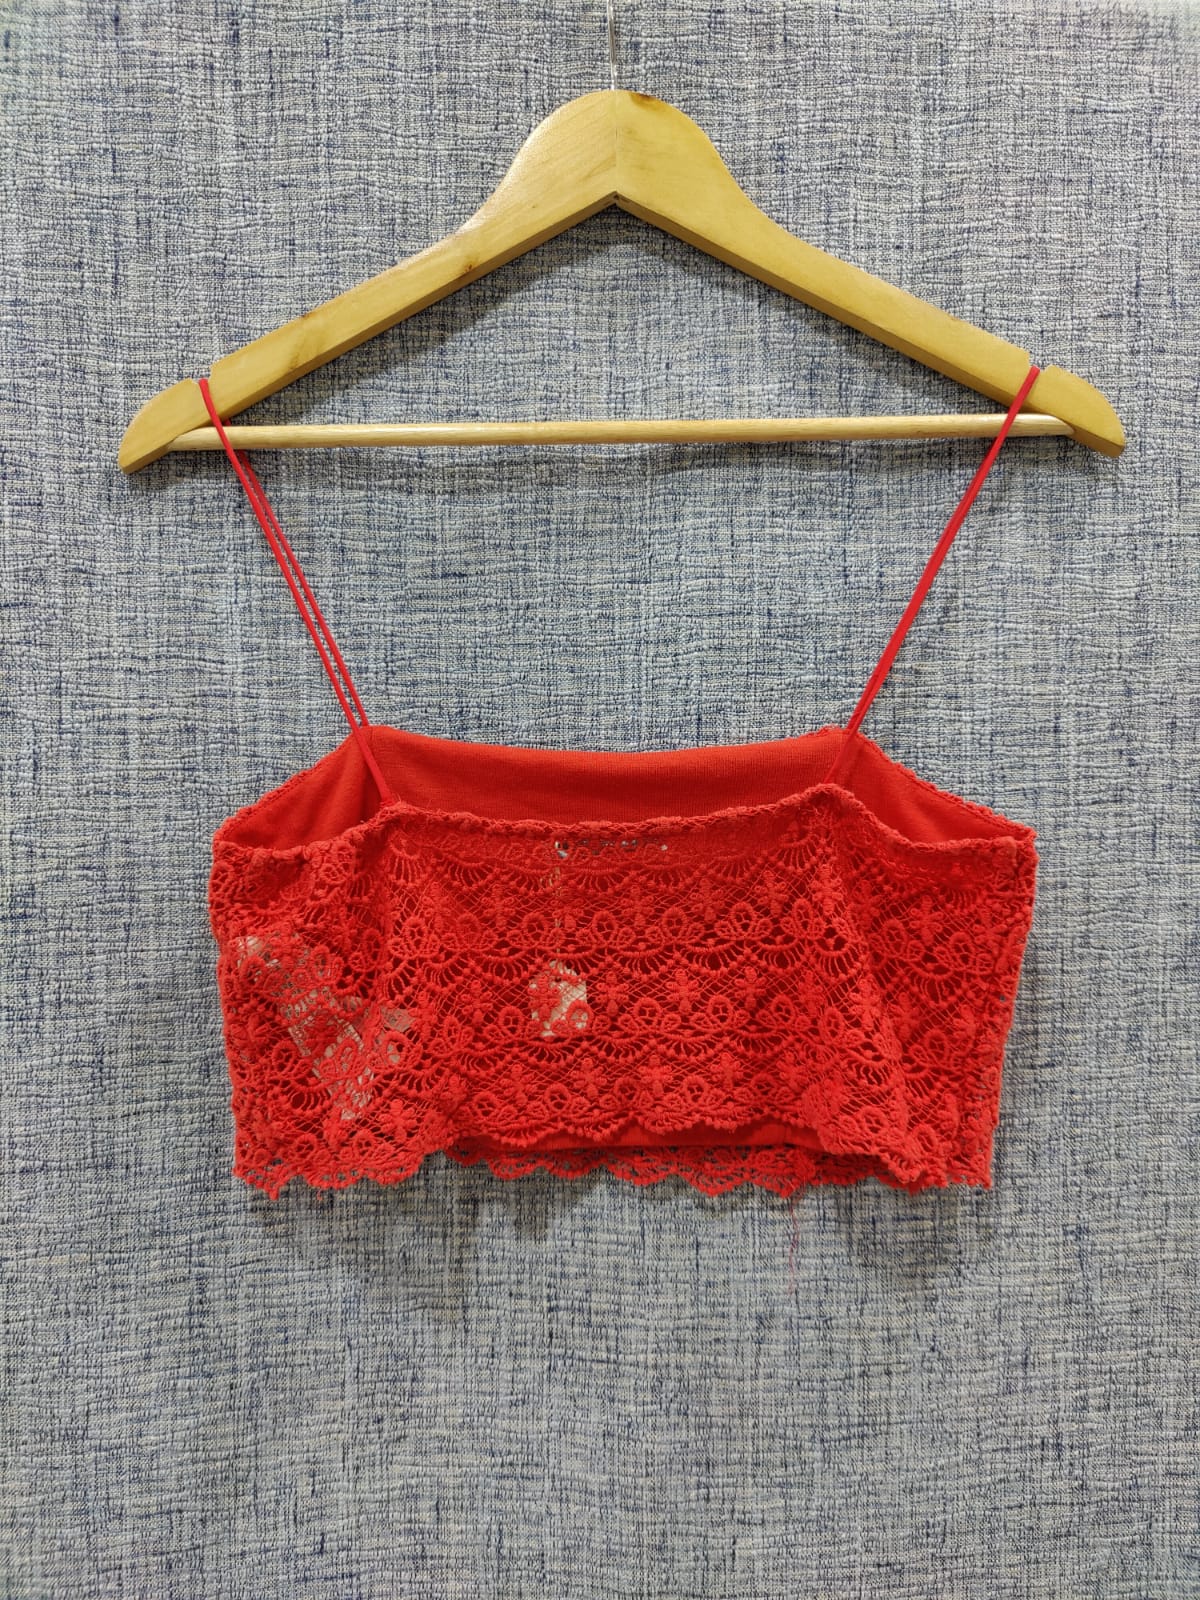 ZARA Red Lace Strapped Crop Top | Relove